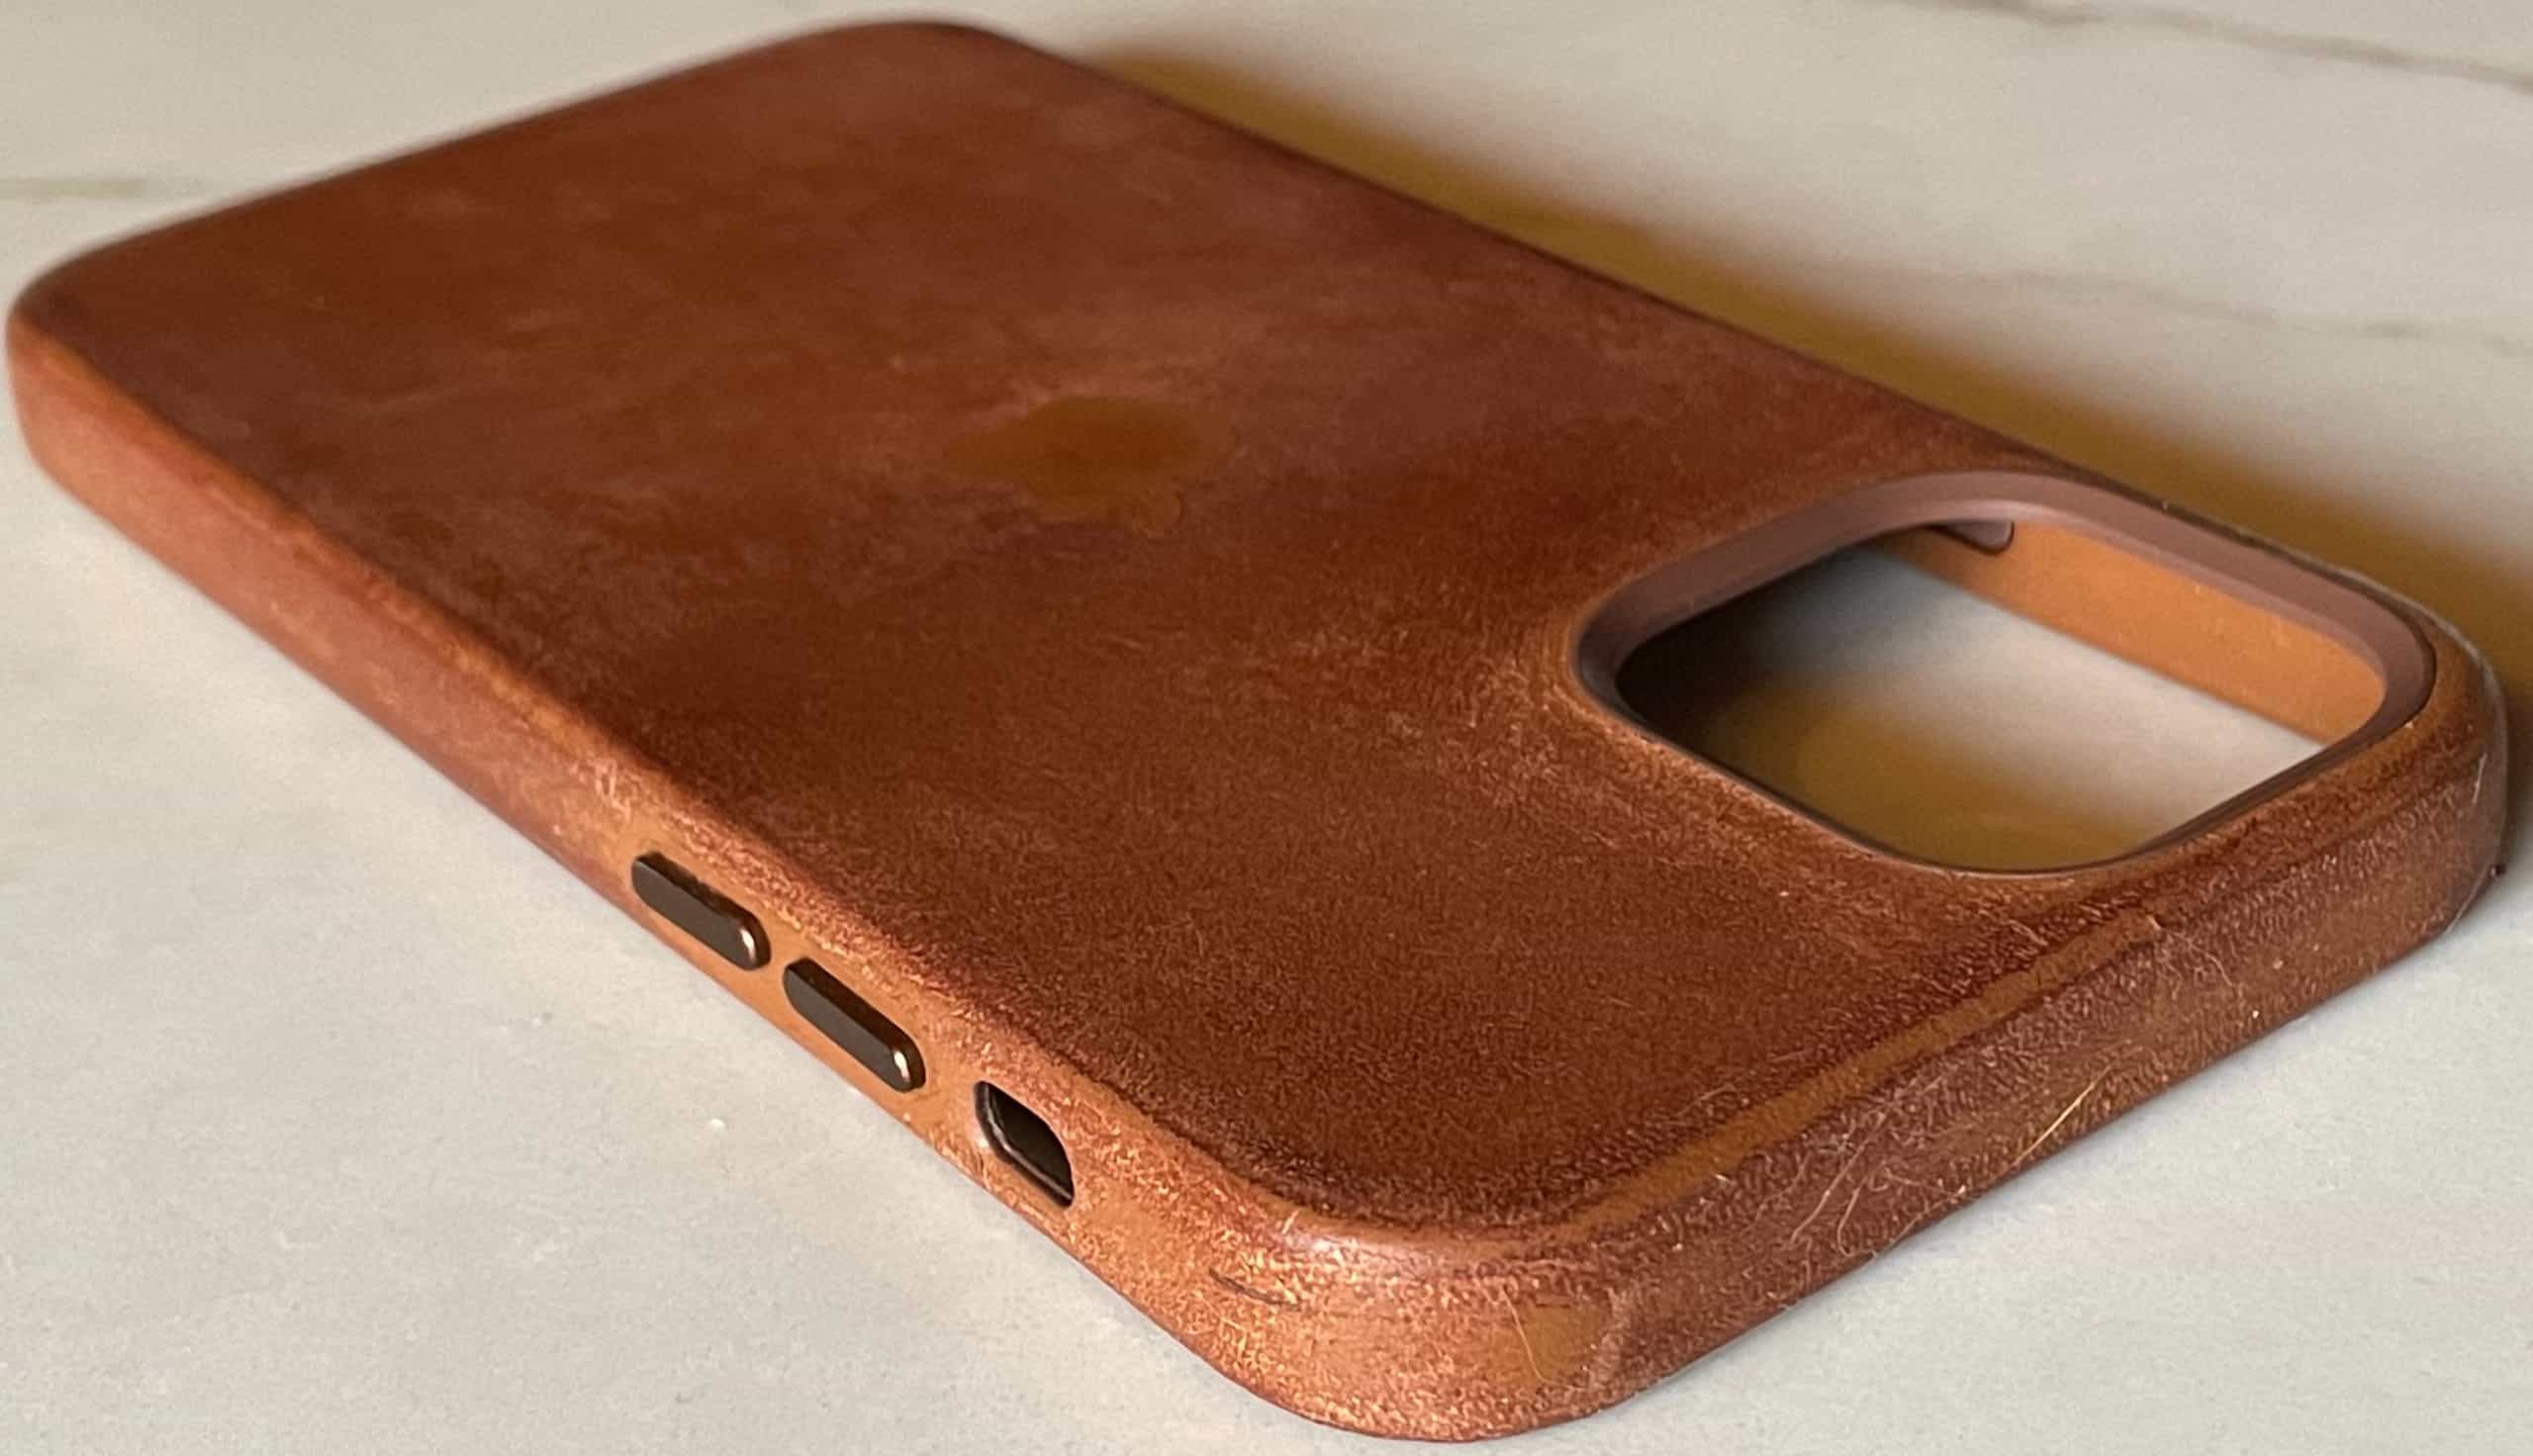 eather apple case after 5 years use